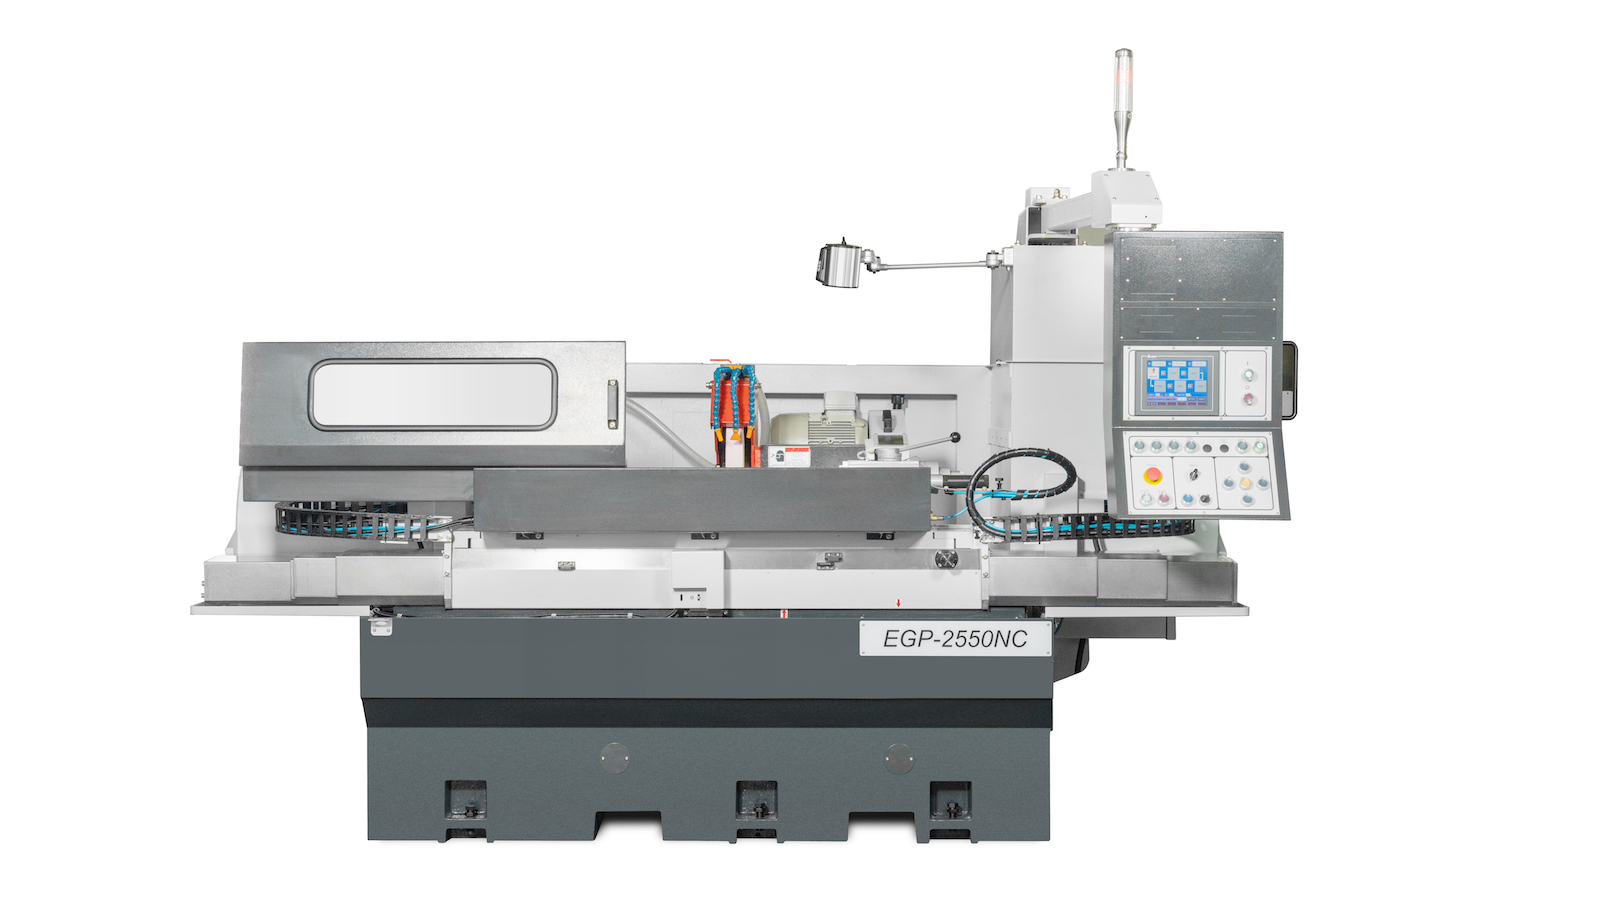 Suppliers of Automatic Infeed CNC Grinders UK